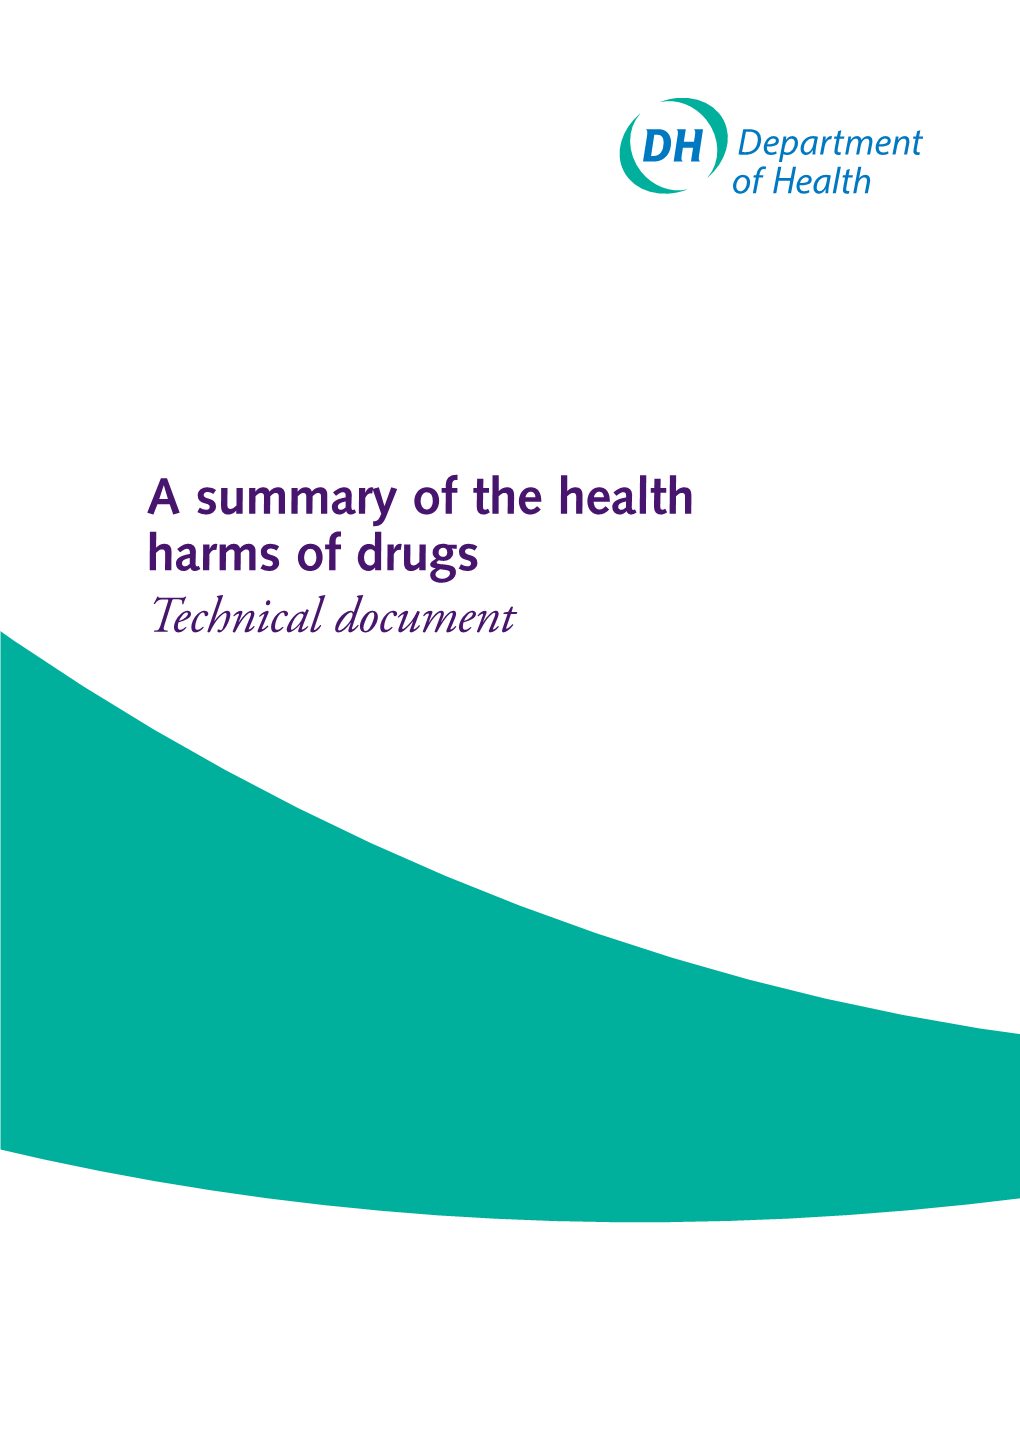 A Summary of the Health Harms of Drugs Technical Document